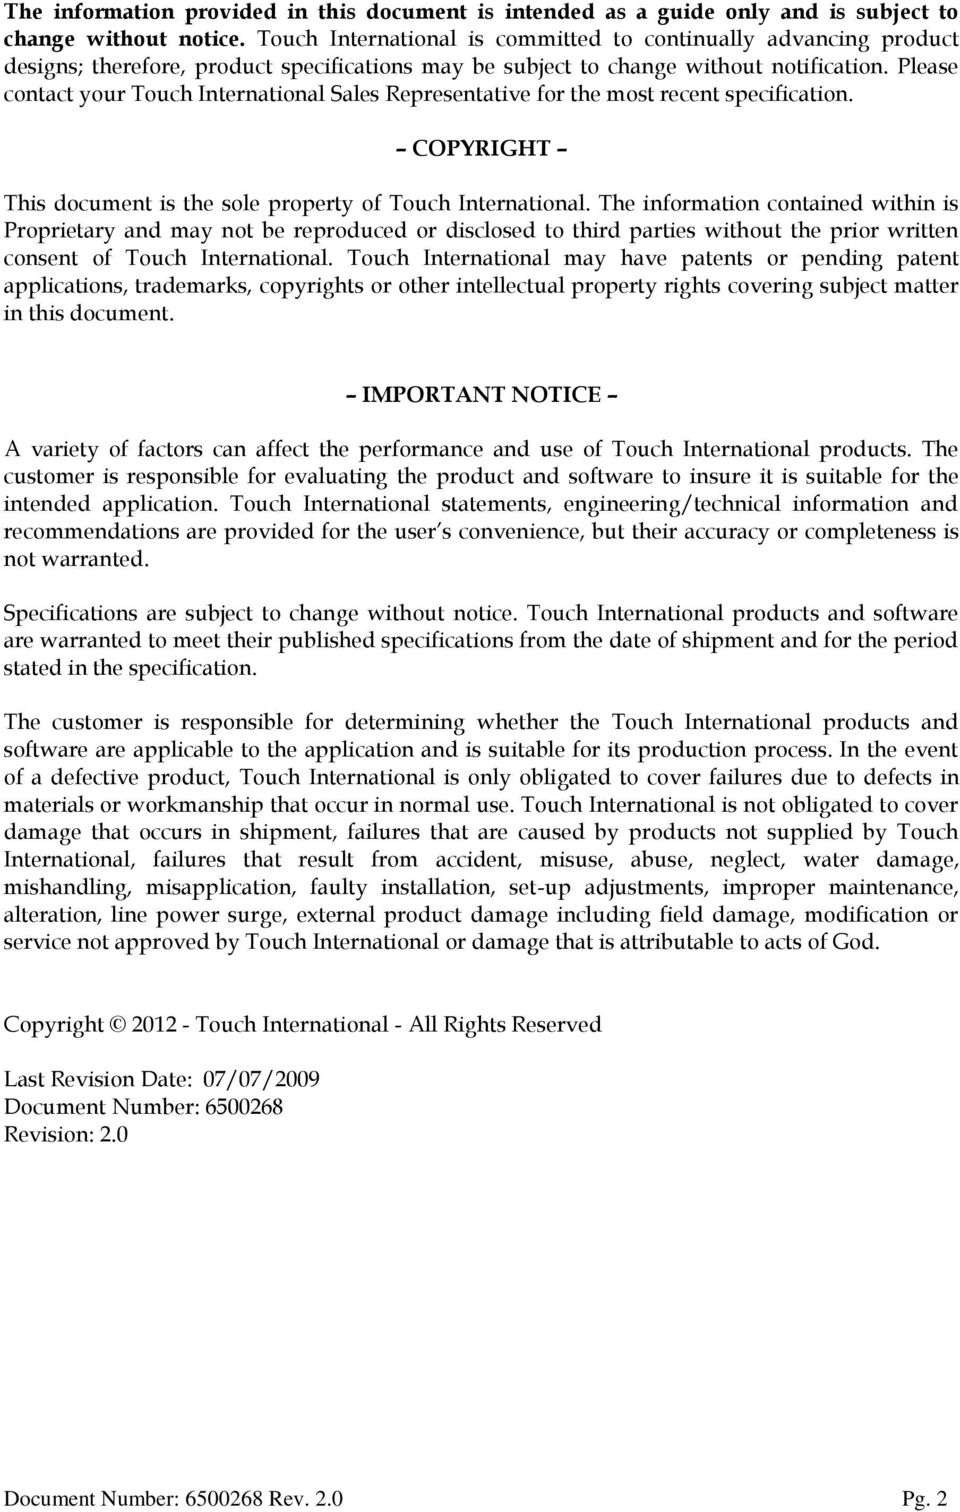 Please contact your Touch International Sales Representative for the most recent specification. COPYRIGHT This document is the sole property of Touch International.